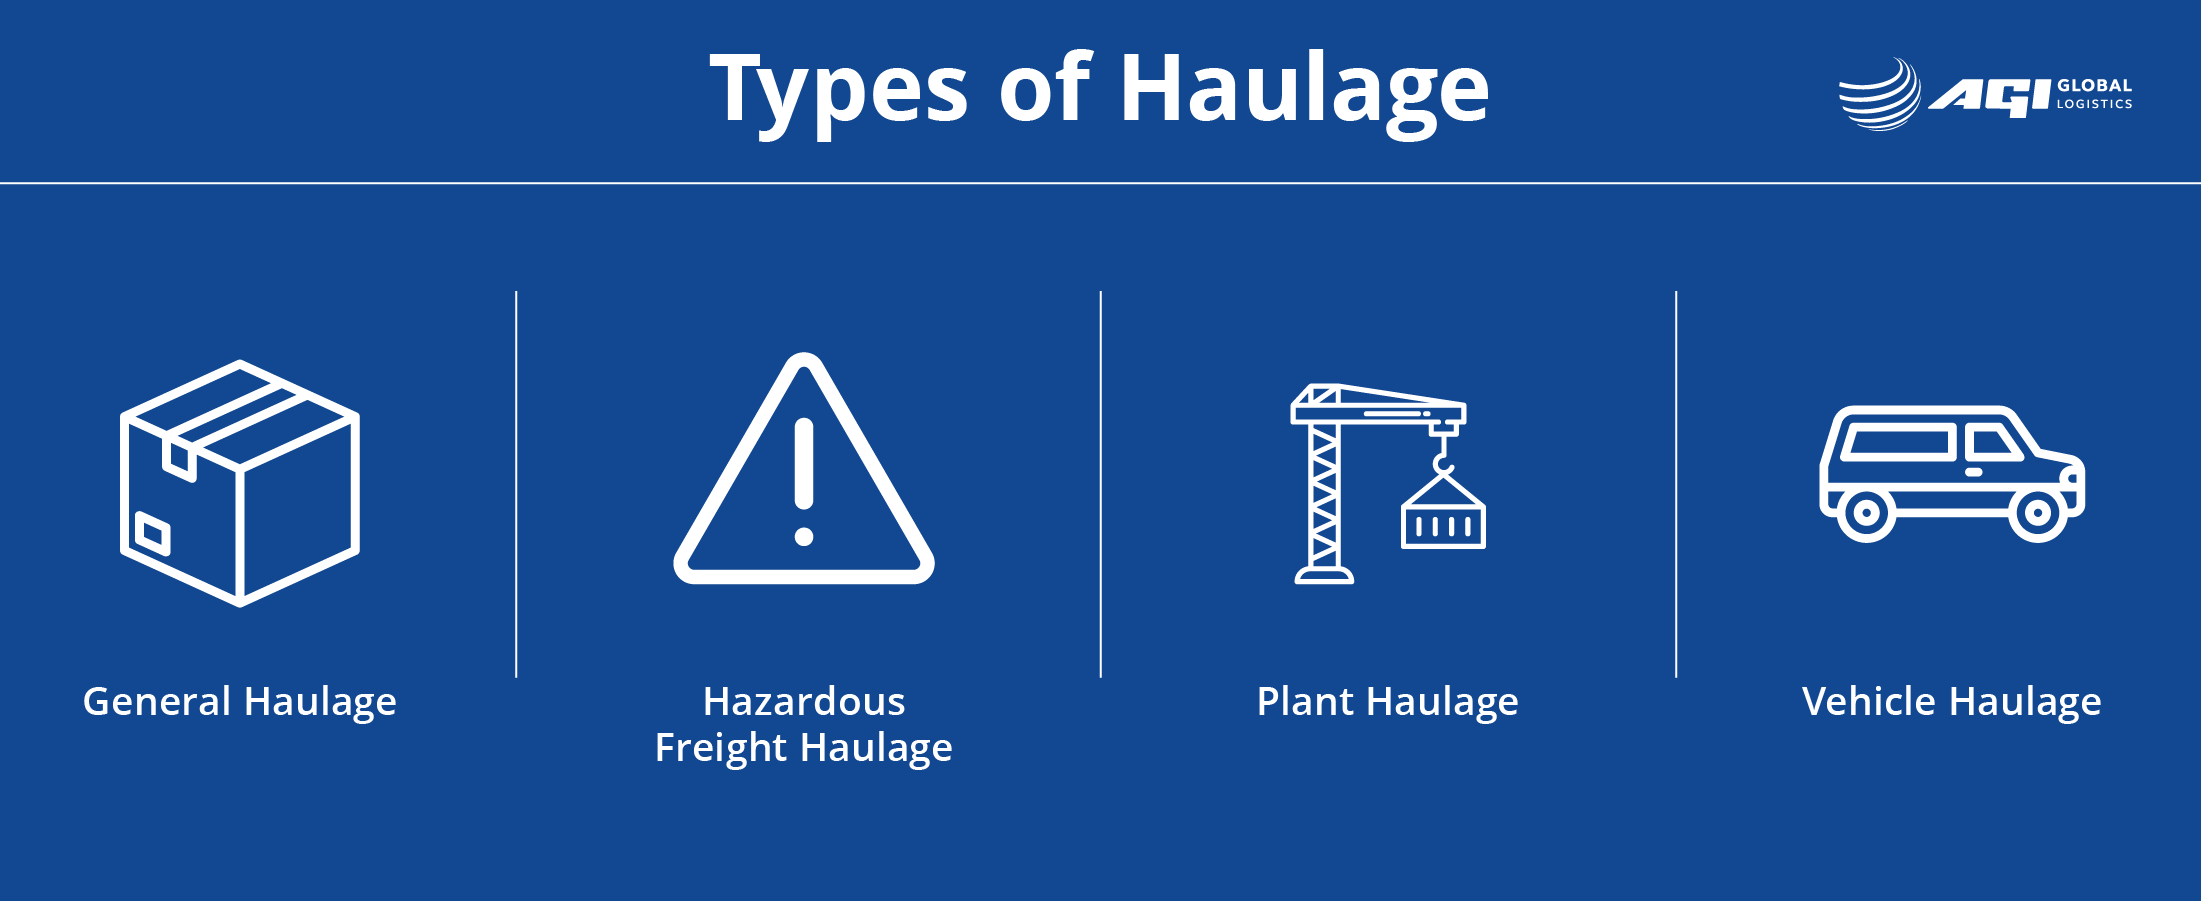 a graphic depicting the different types of haulage: general haulage, hazardous freight haulage, plant haulage